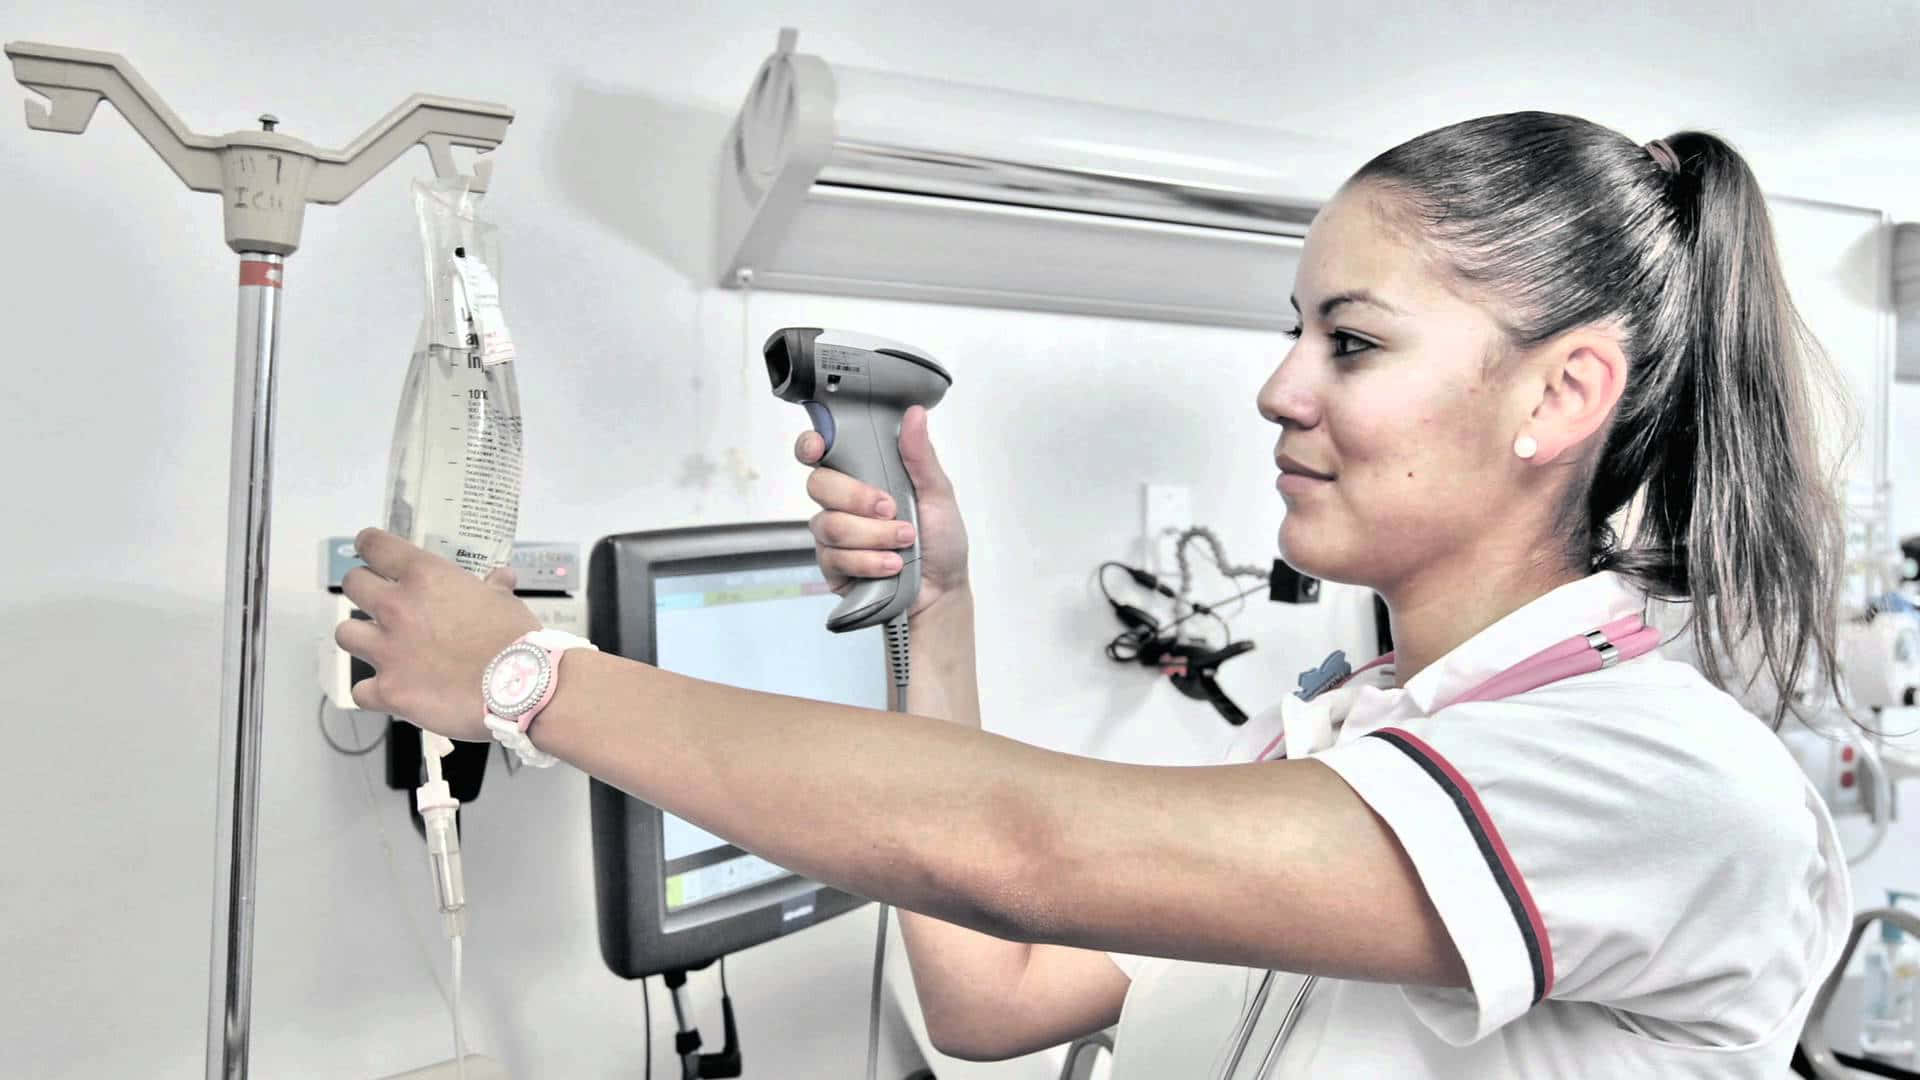 A Nurse Is Using A Device To Check A Patient